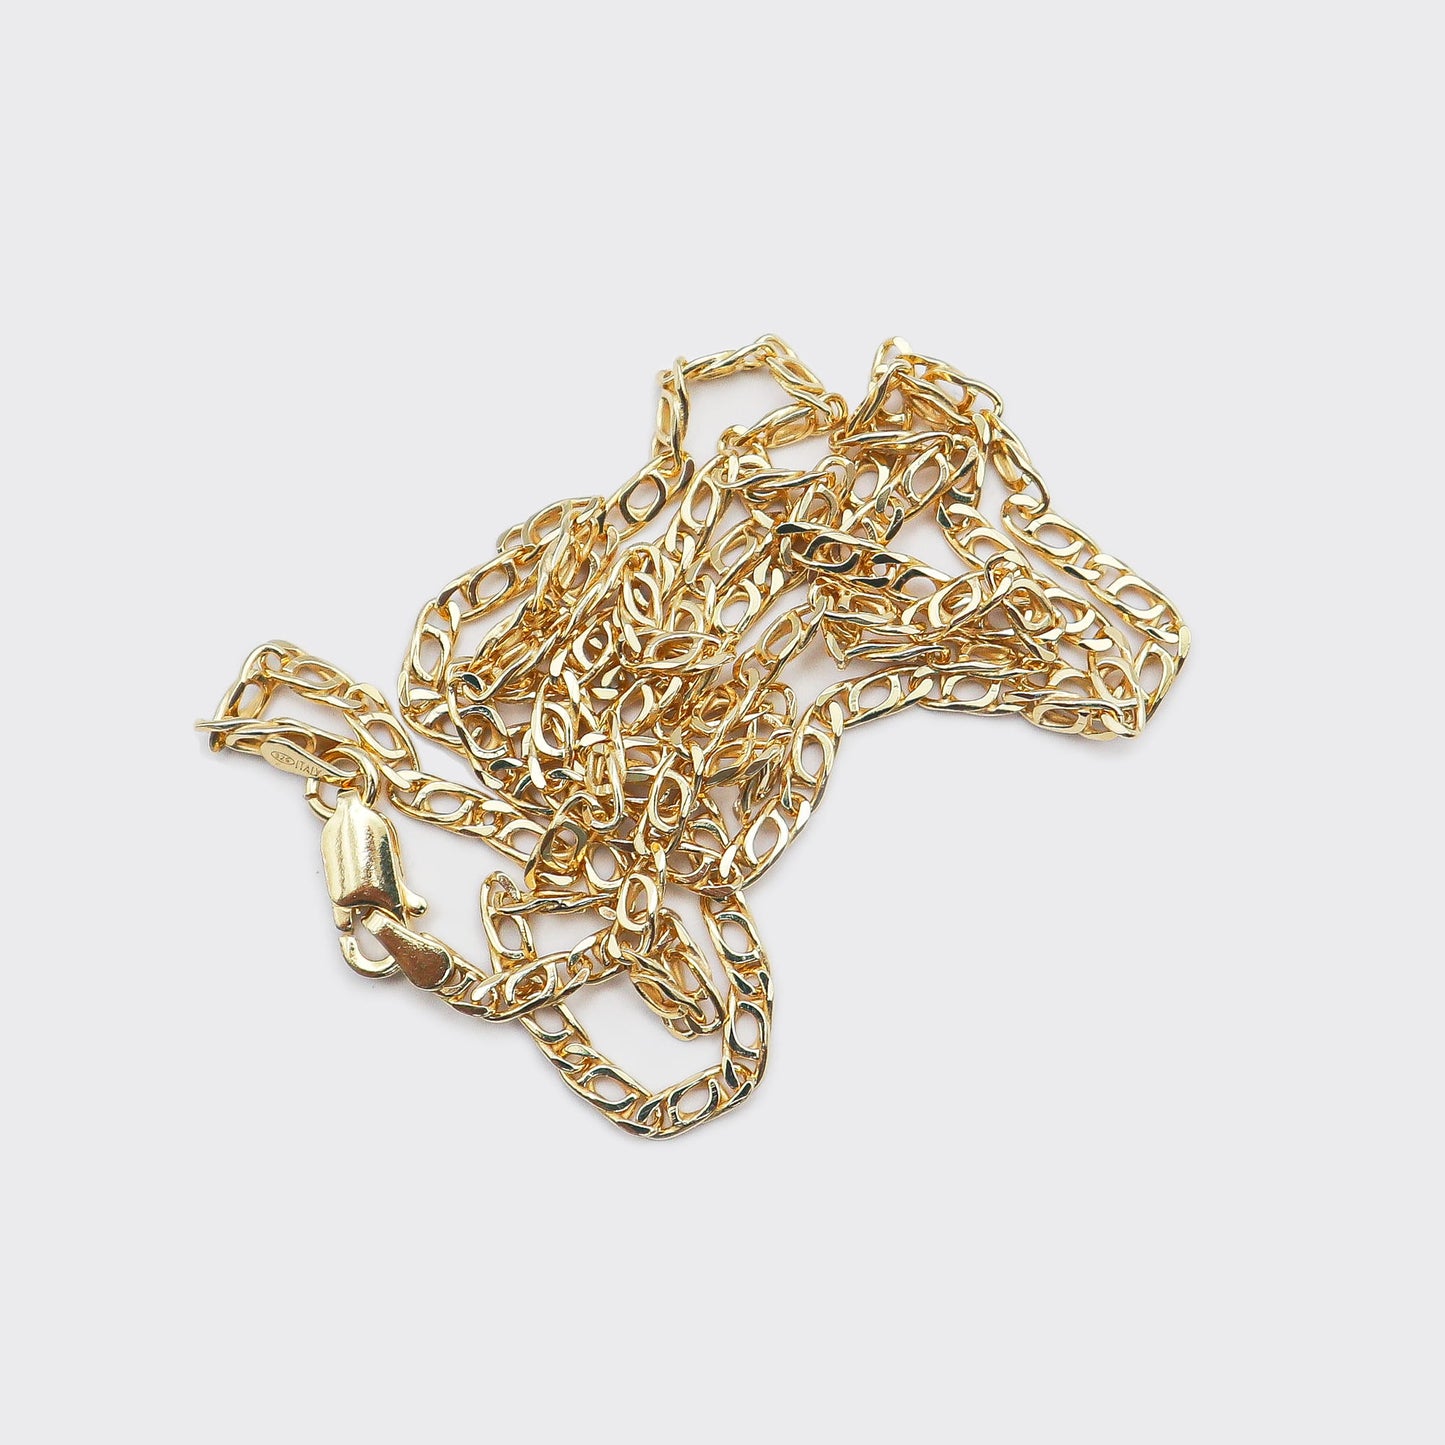 The Cartridge Chain is an elegant and unisex piece of jewelry, crafted in Italy and made of 925 Sterling Silver with a high-quality 18 karat gold plating. Every jewelry is designed by Atelier Domingo's in France and is made to be worn by both men and women.